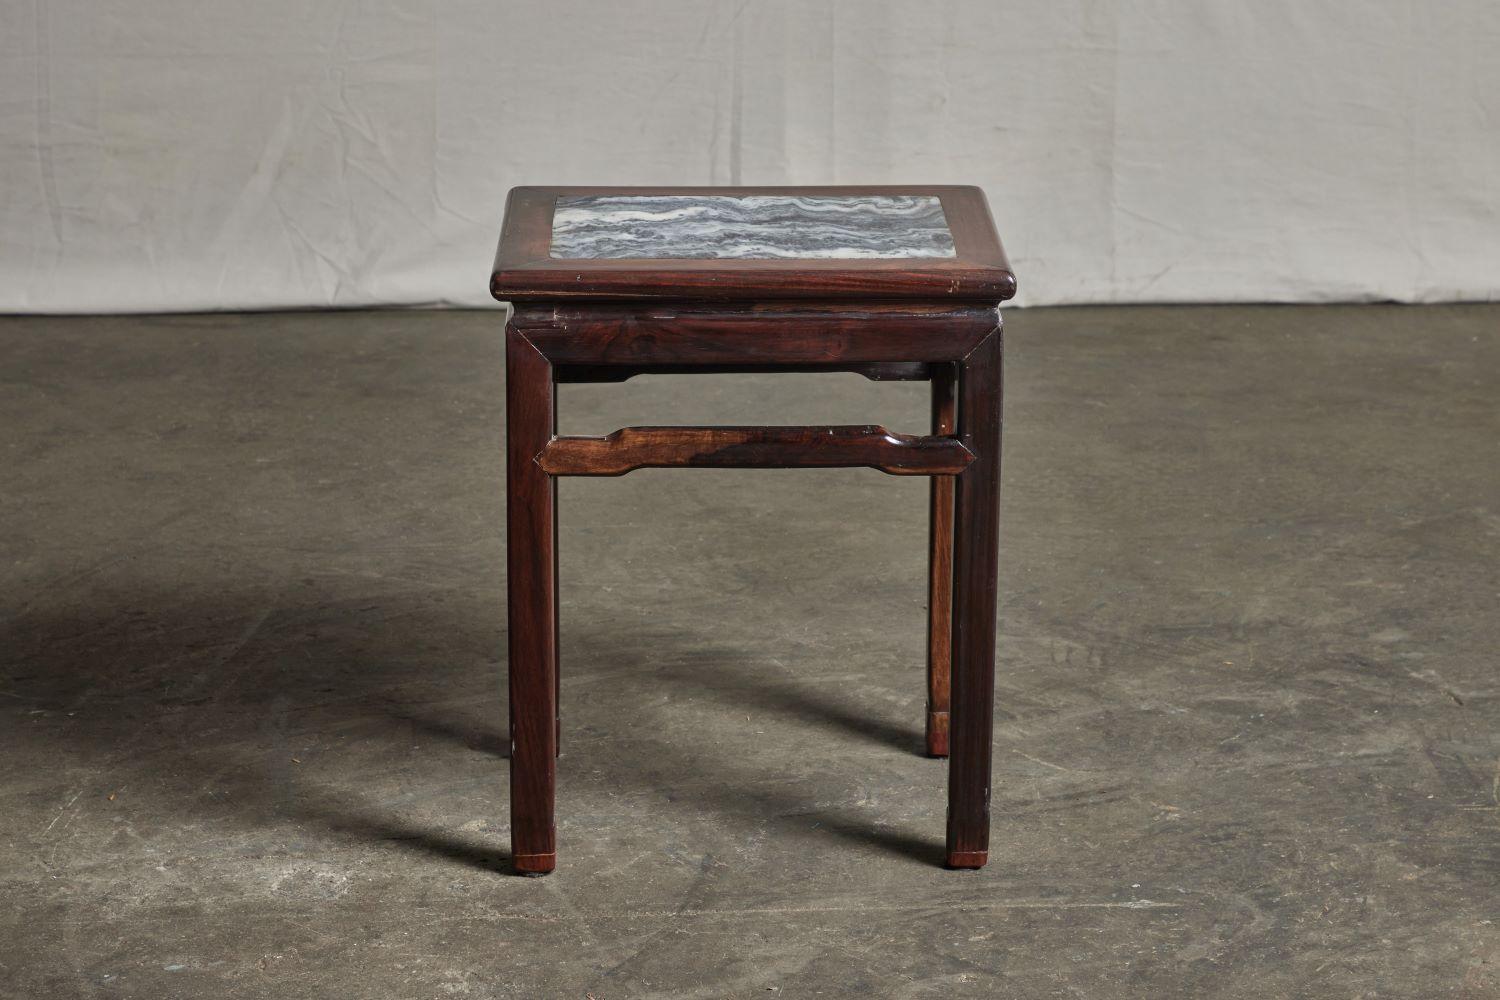 Pair of rosewood tea tables from Kwangtung. “Hong Mu” Pair only. With gray rectangular marble top.